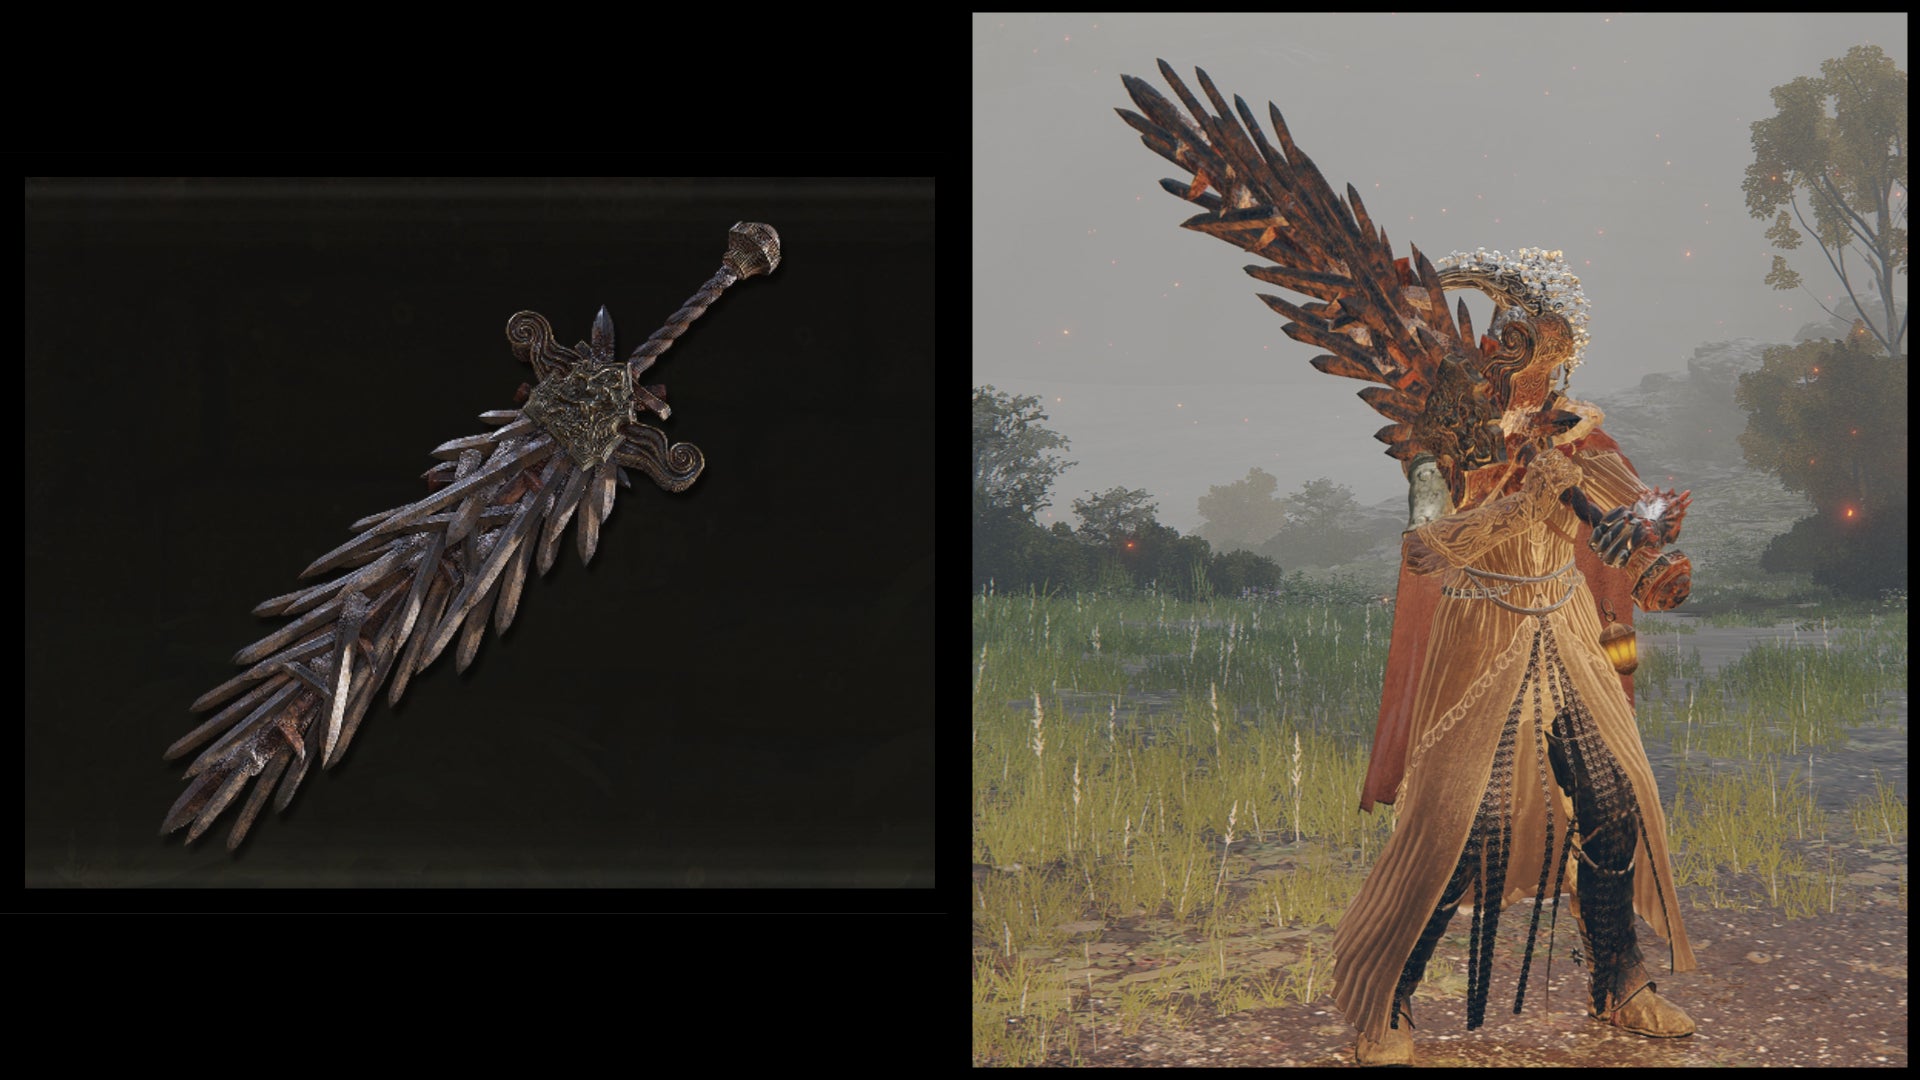 Left: an illustration of the Grafted Blade Greatsword from Elden Ring. Right: the player character holding the same weapon against a Limgrave background.